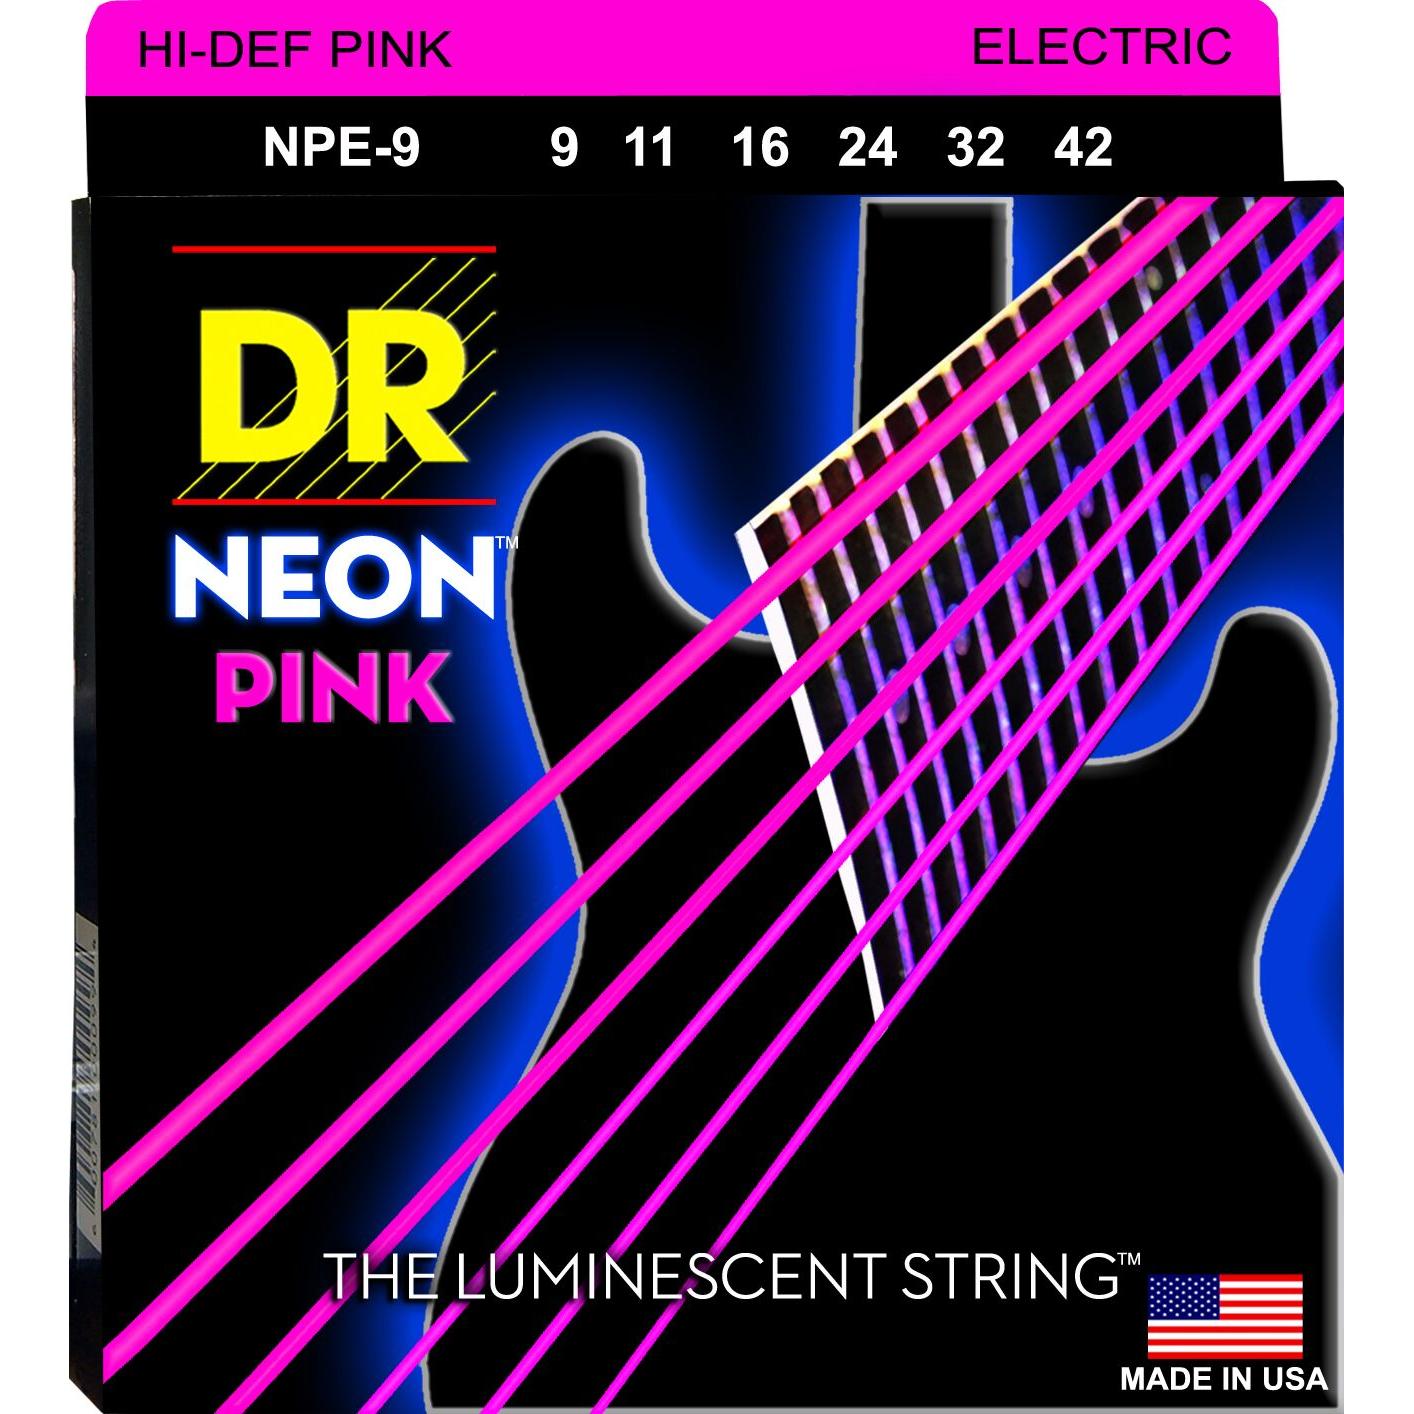 DR NPE-9 NEON PINK